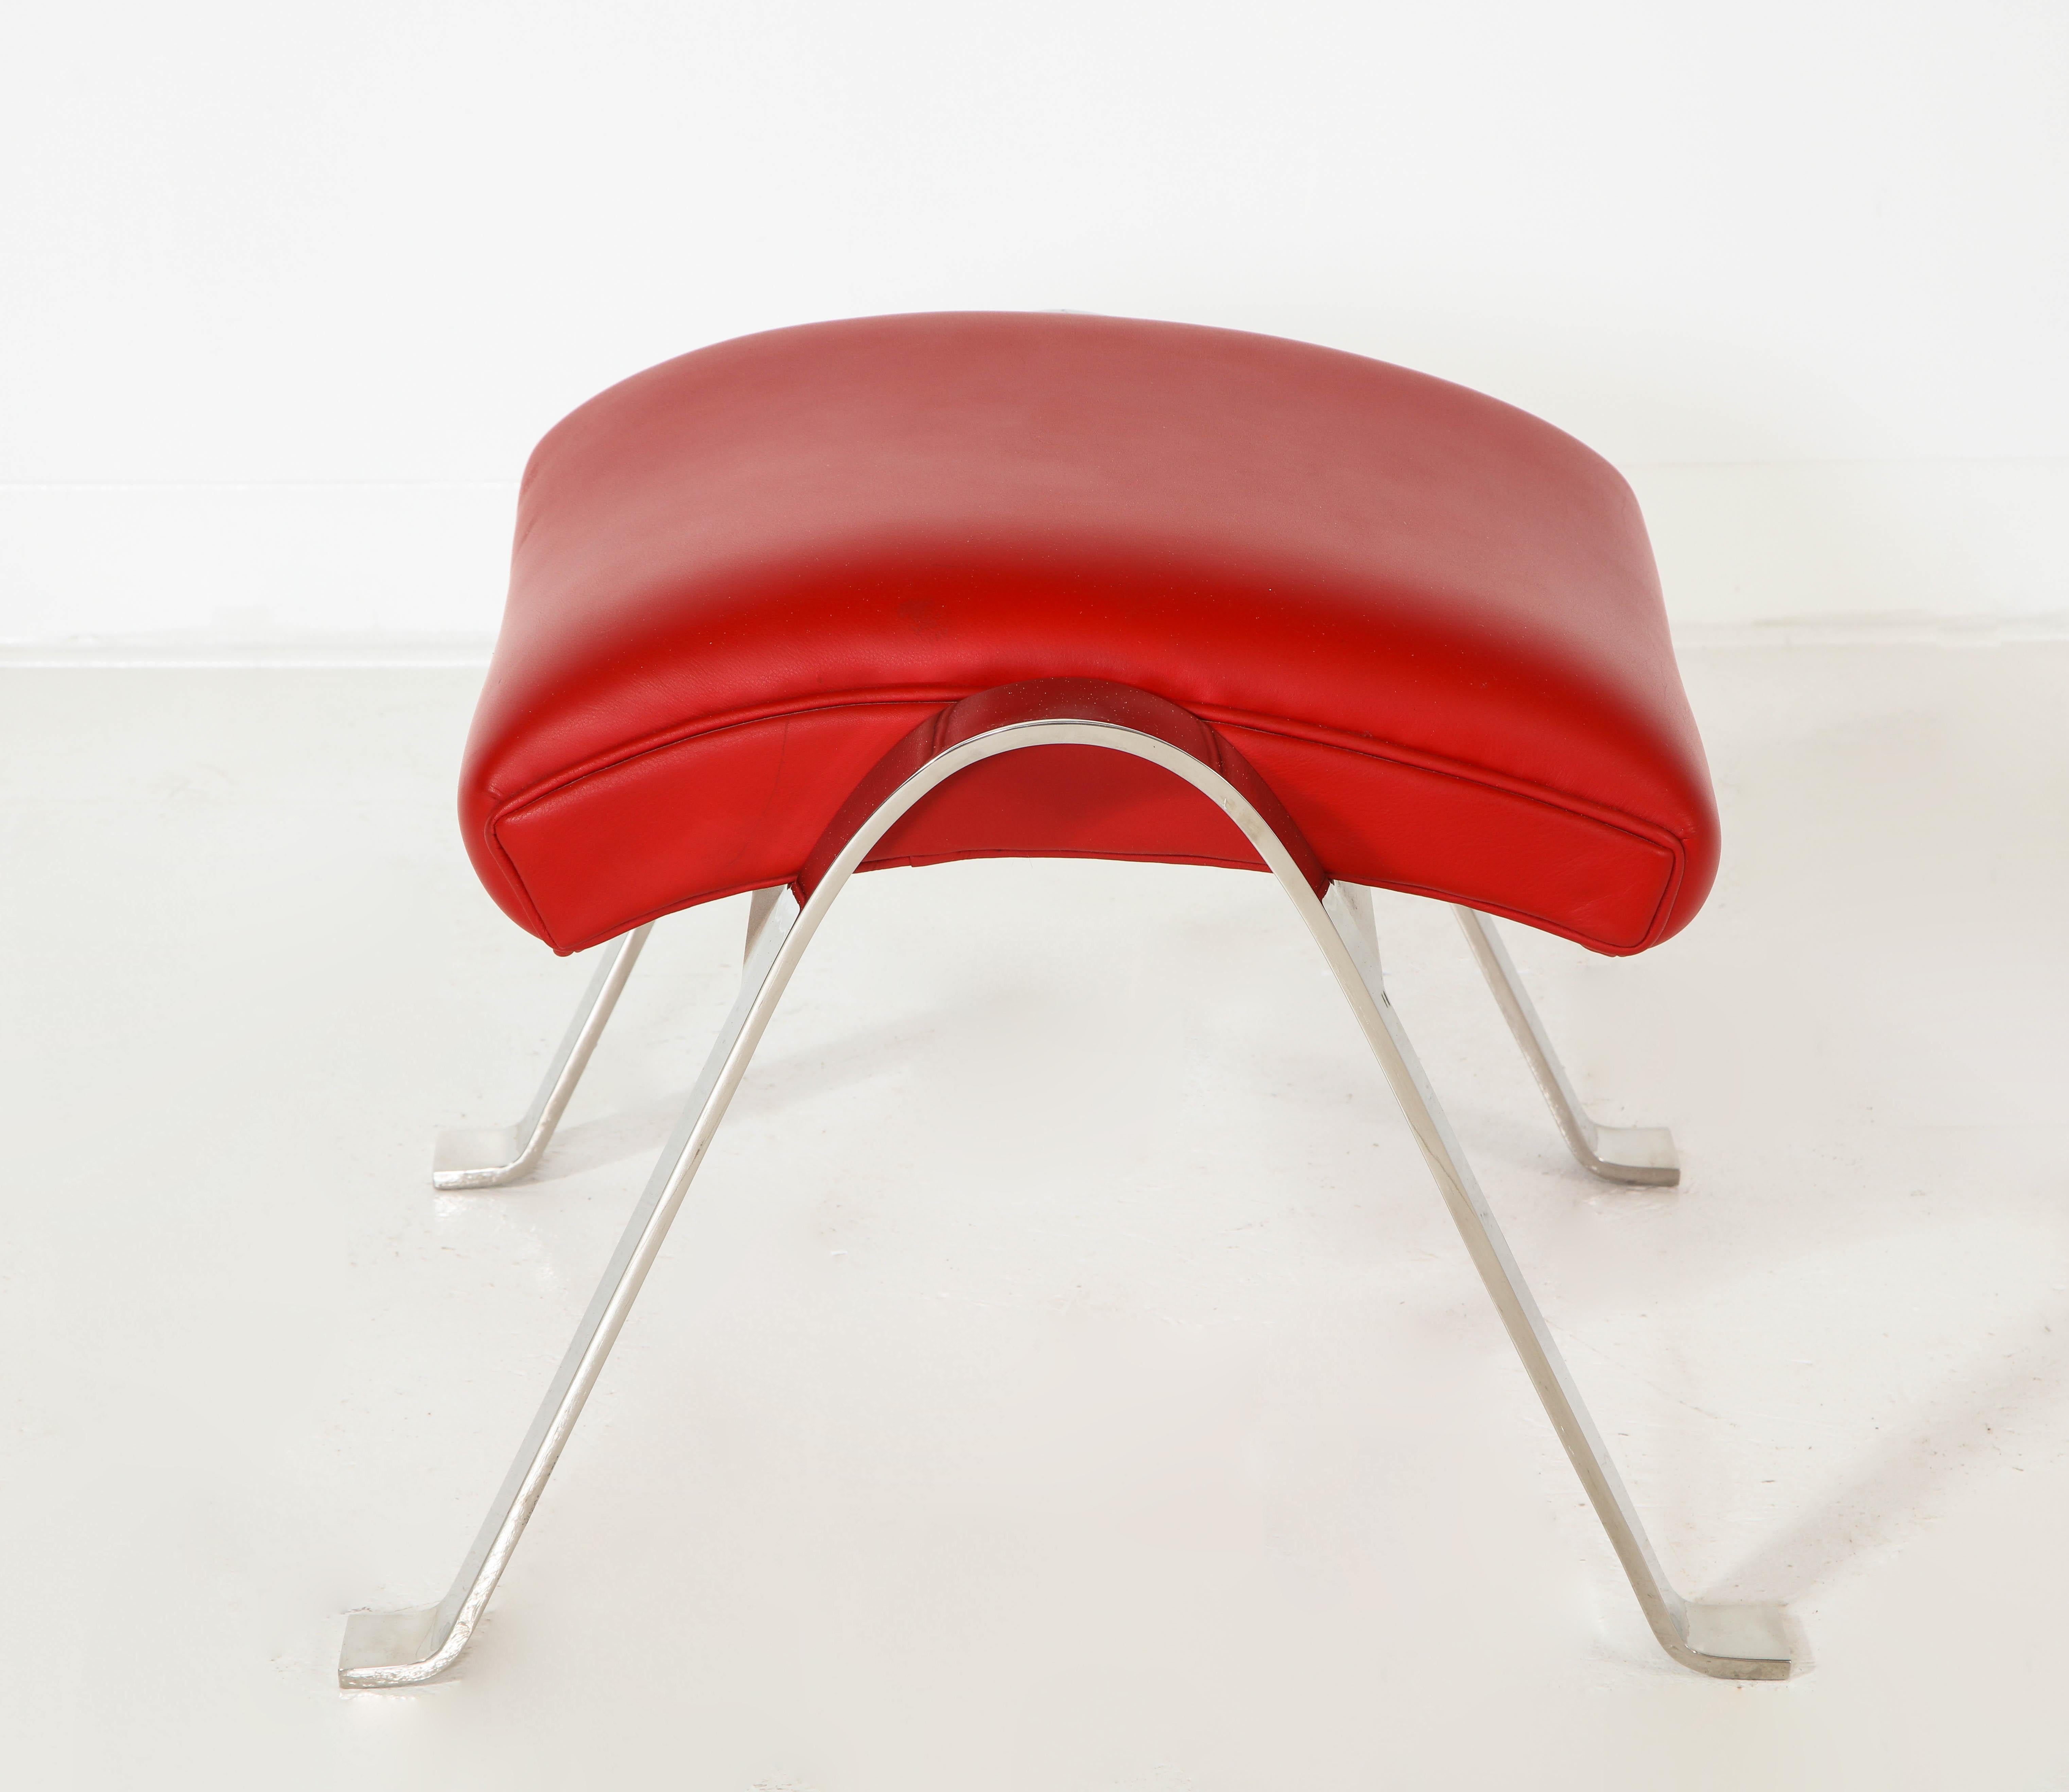 Foot Stool in Red Offered by Vladimir Kagan Design Group For Sale 1